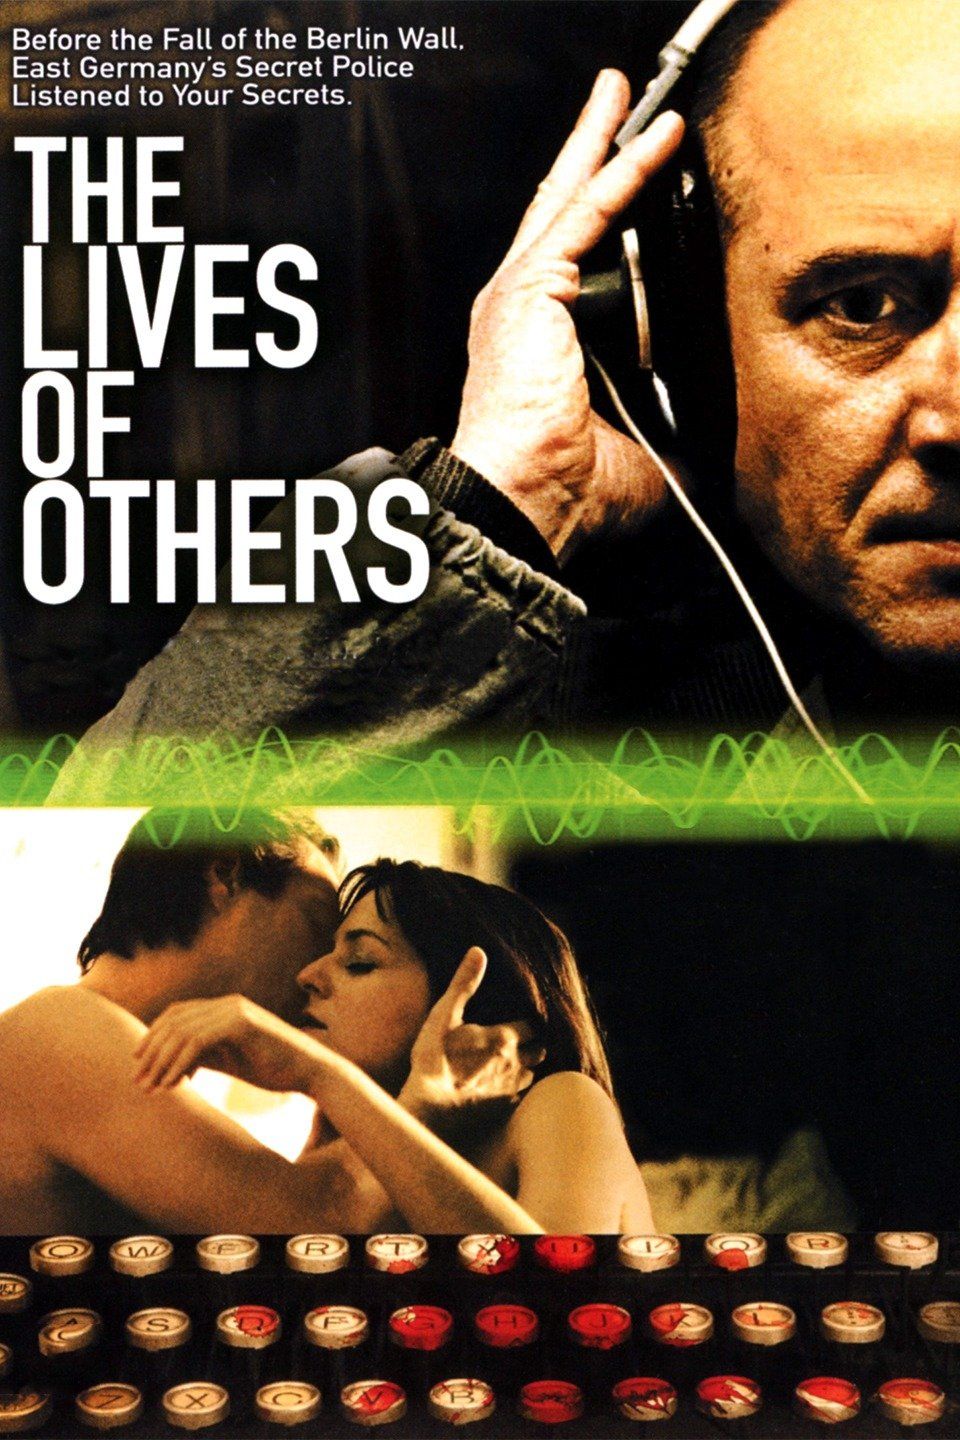 Watch The Lives of Others (2006) Full Movie Online - Plex